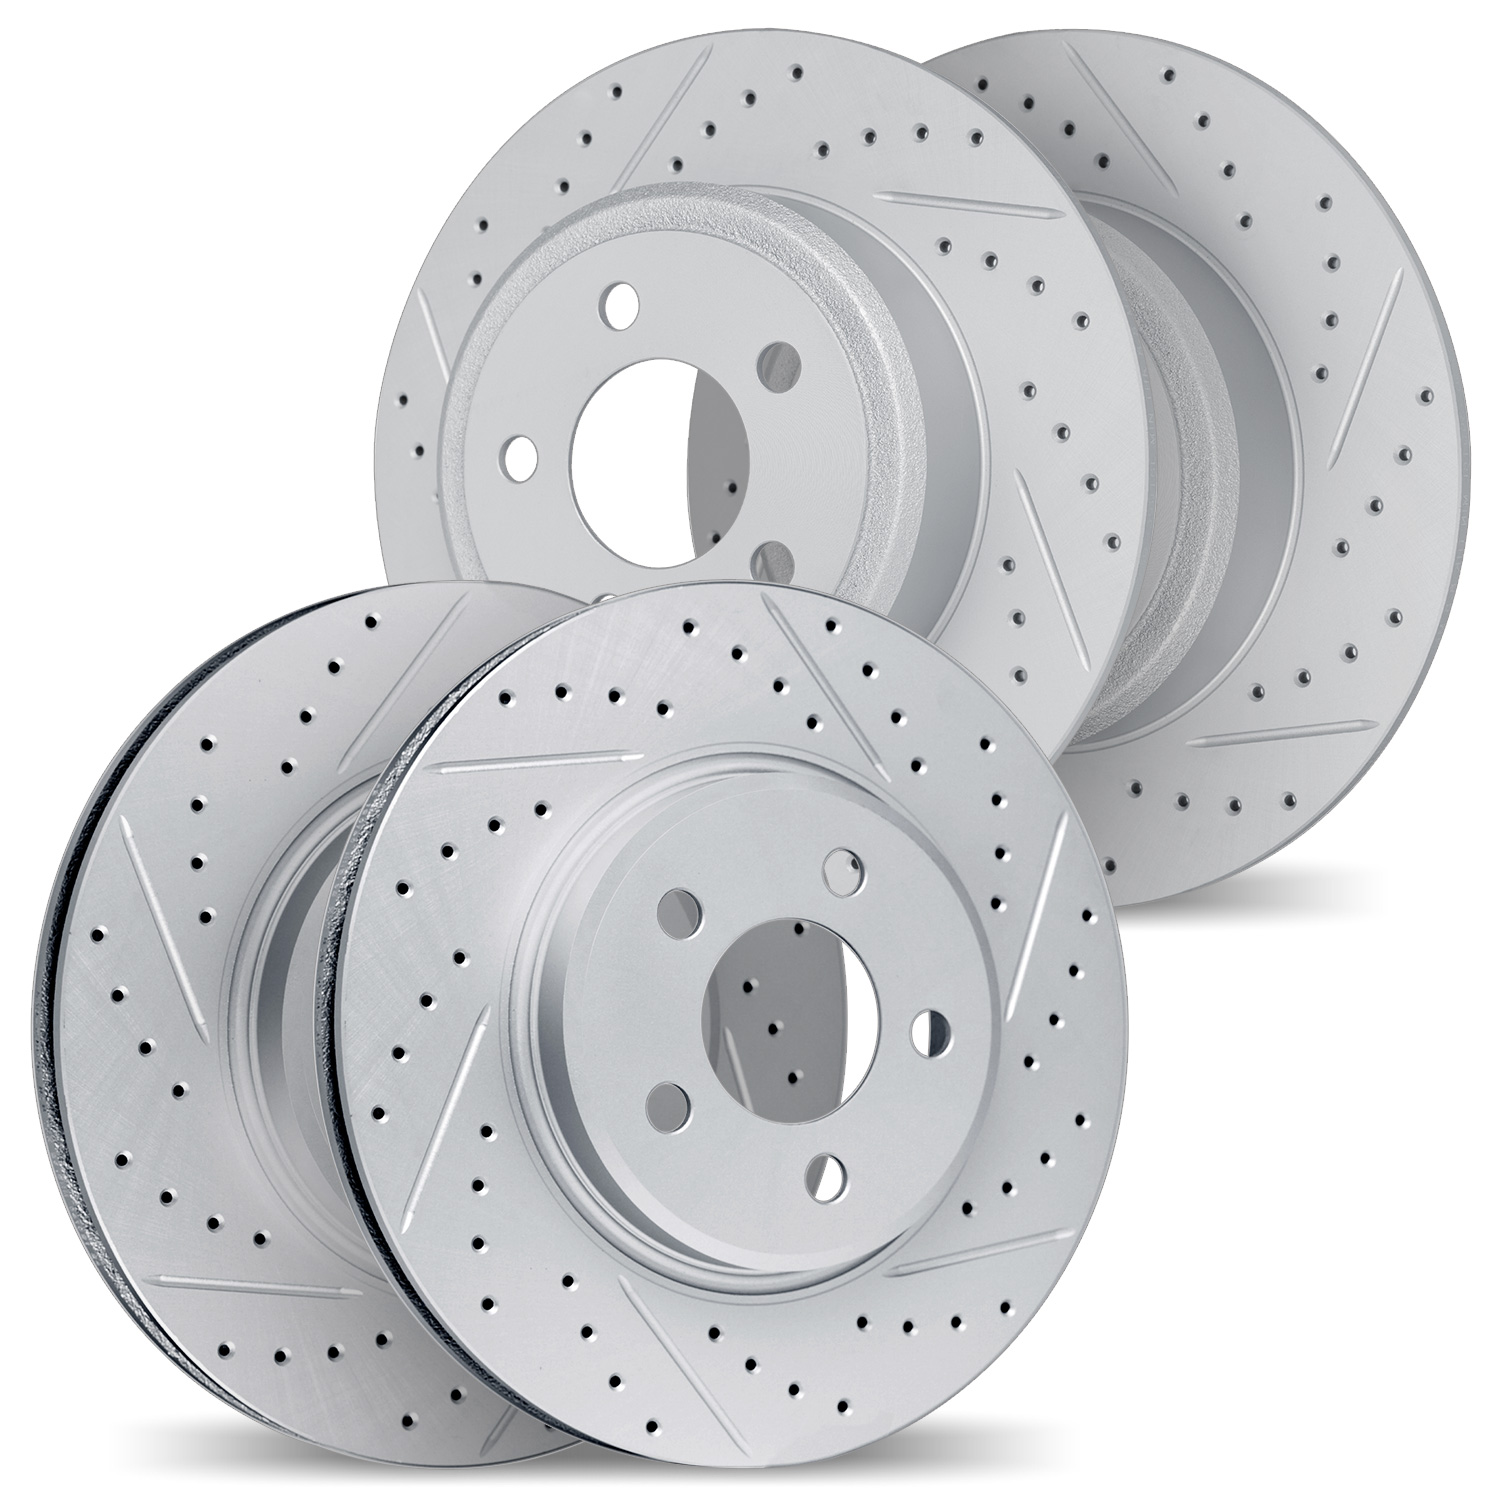 2004-76003 Geoperformance Drilled/Slotted Brake Rotors, 1992-2003 Lexus/Toyota/Scion, Position: Front and Rear